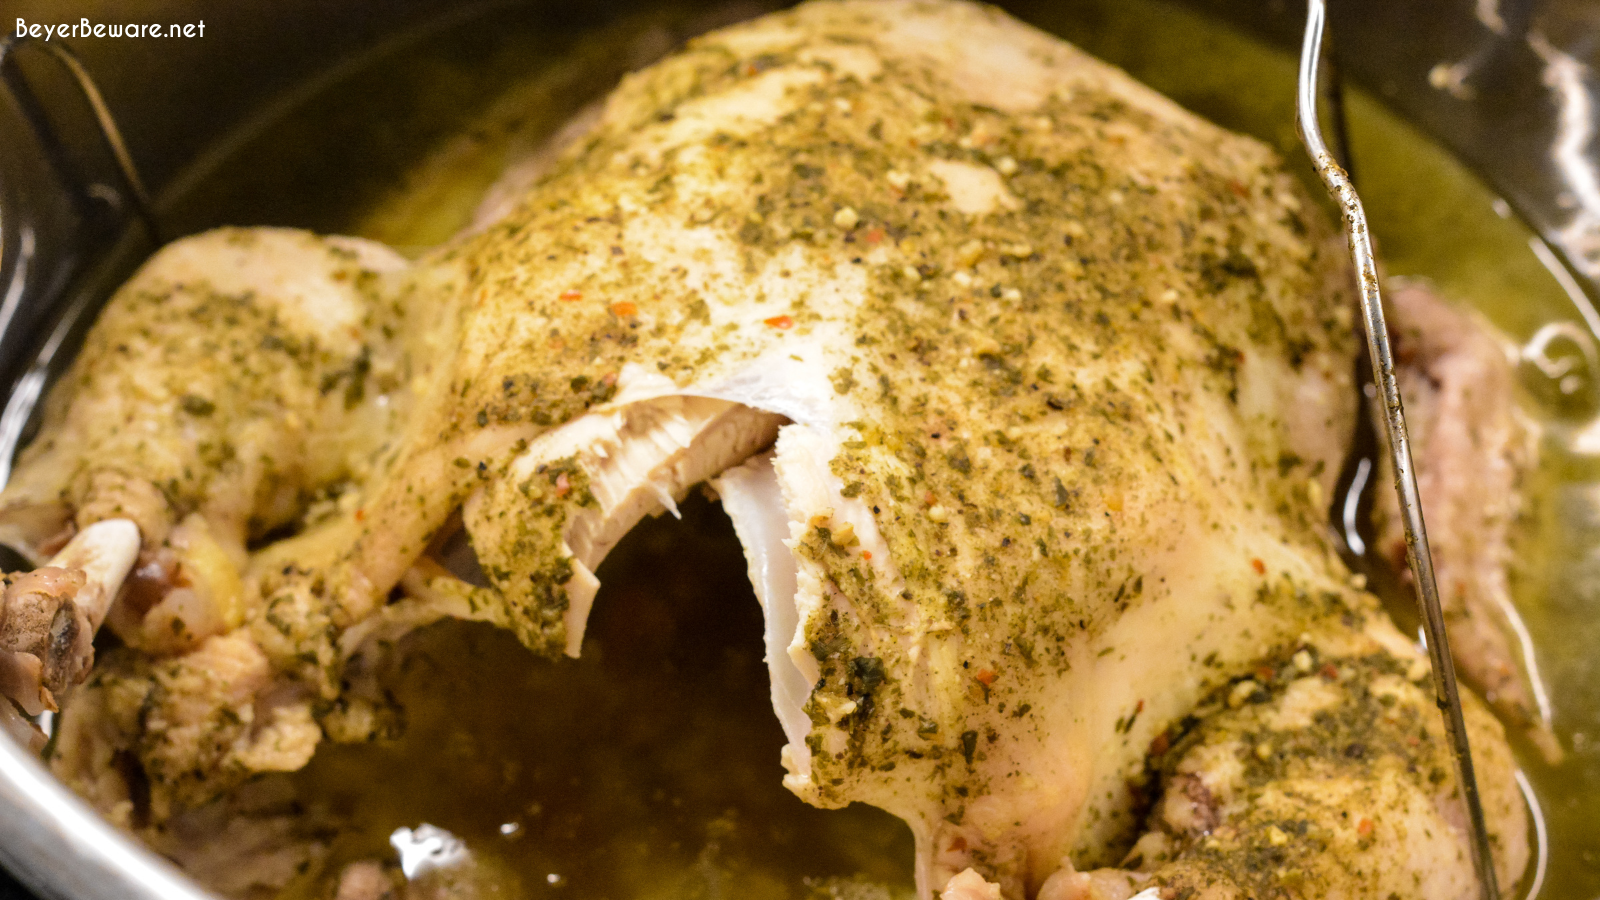 Knowing how to cook a chicken in an Instant Pot will be a gift for cooking a whole chicken quickly for fall of the bone chicken that can be used in soup, casseroles, and salads.